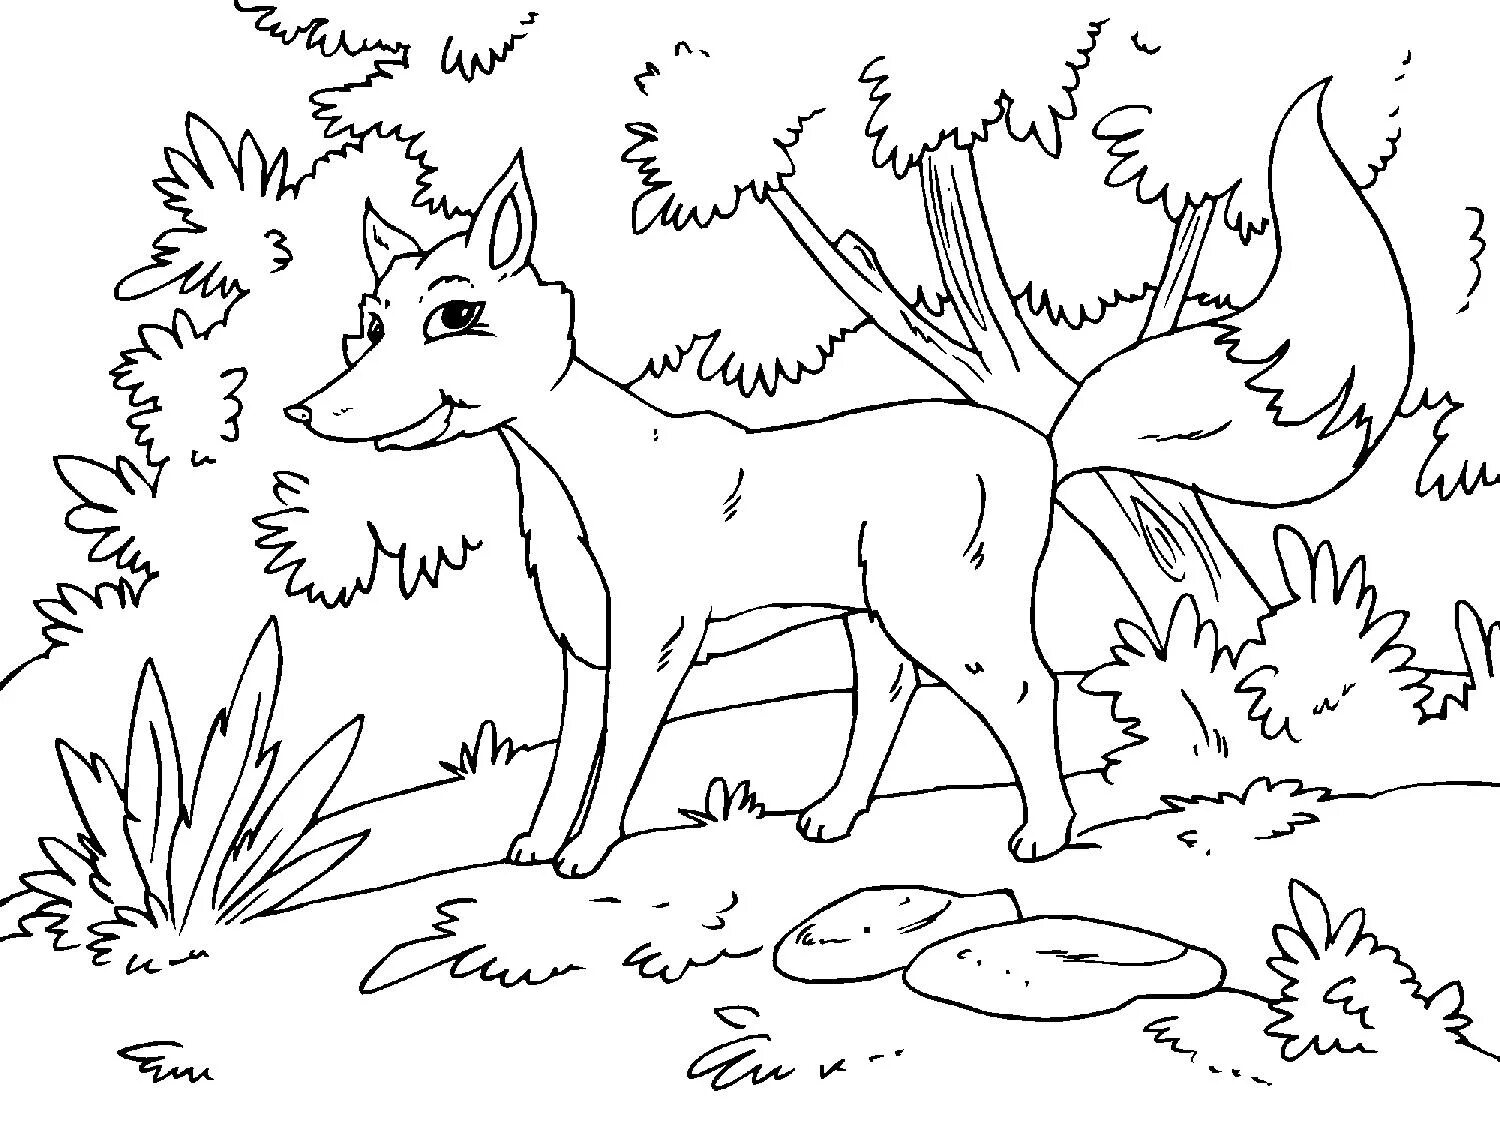 Fox in the forest #2